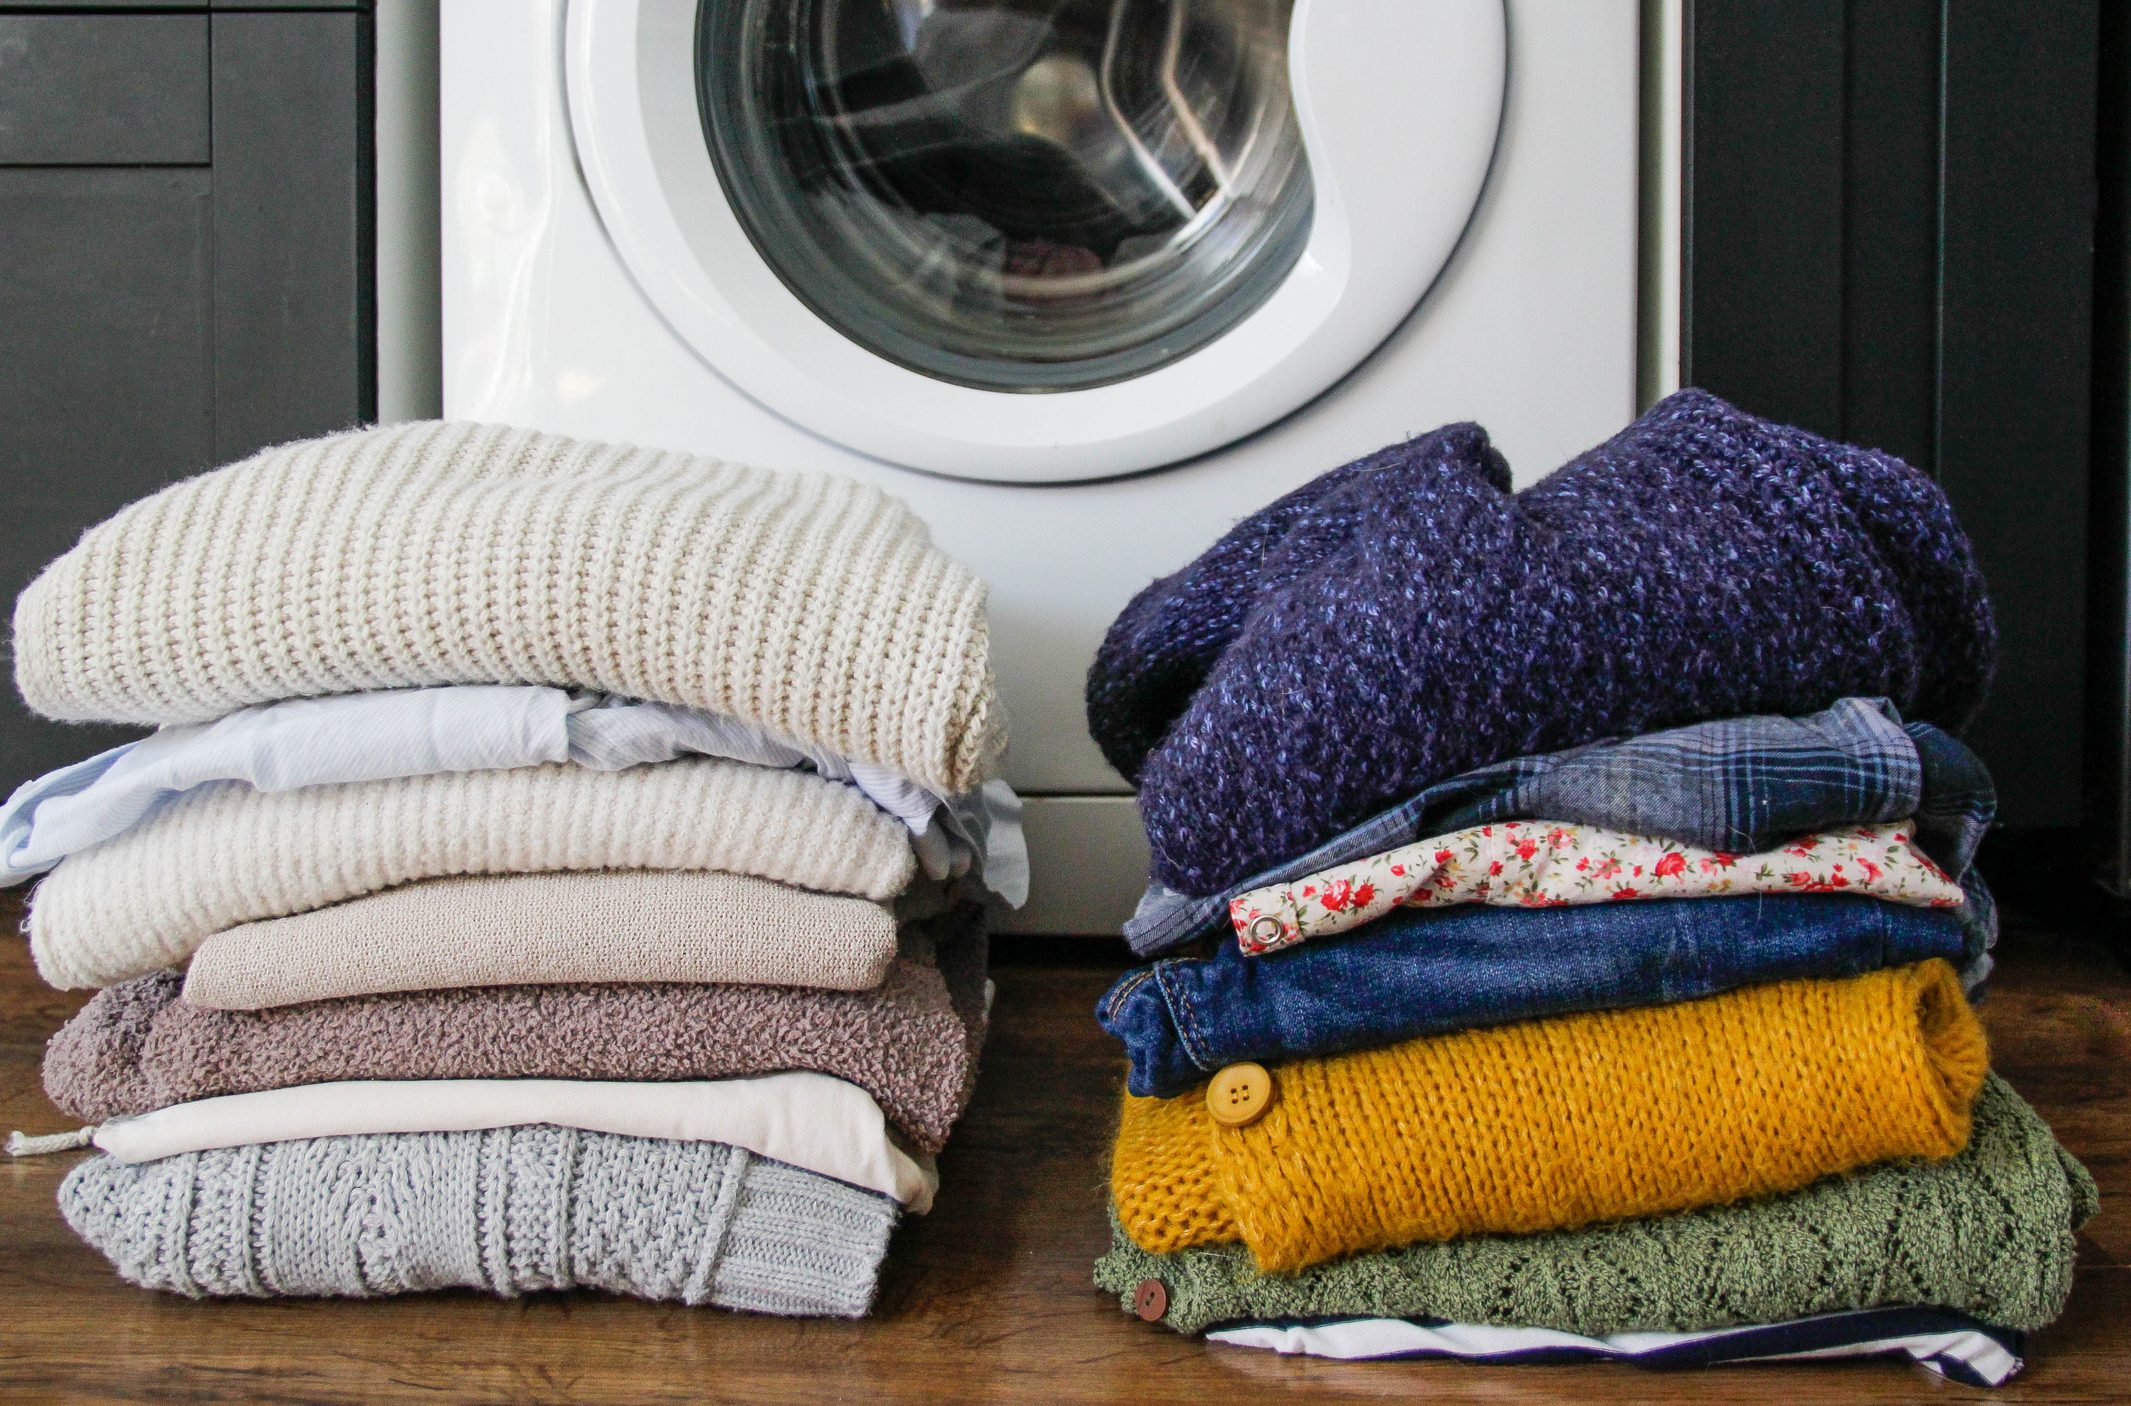 How to Separate Laundry: Easy, Expert-Approved Tips for Sorting Clothes